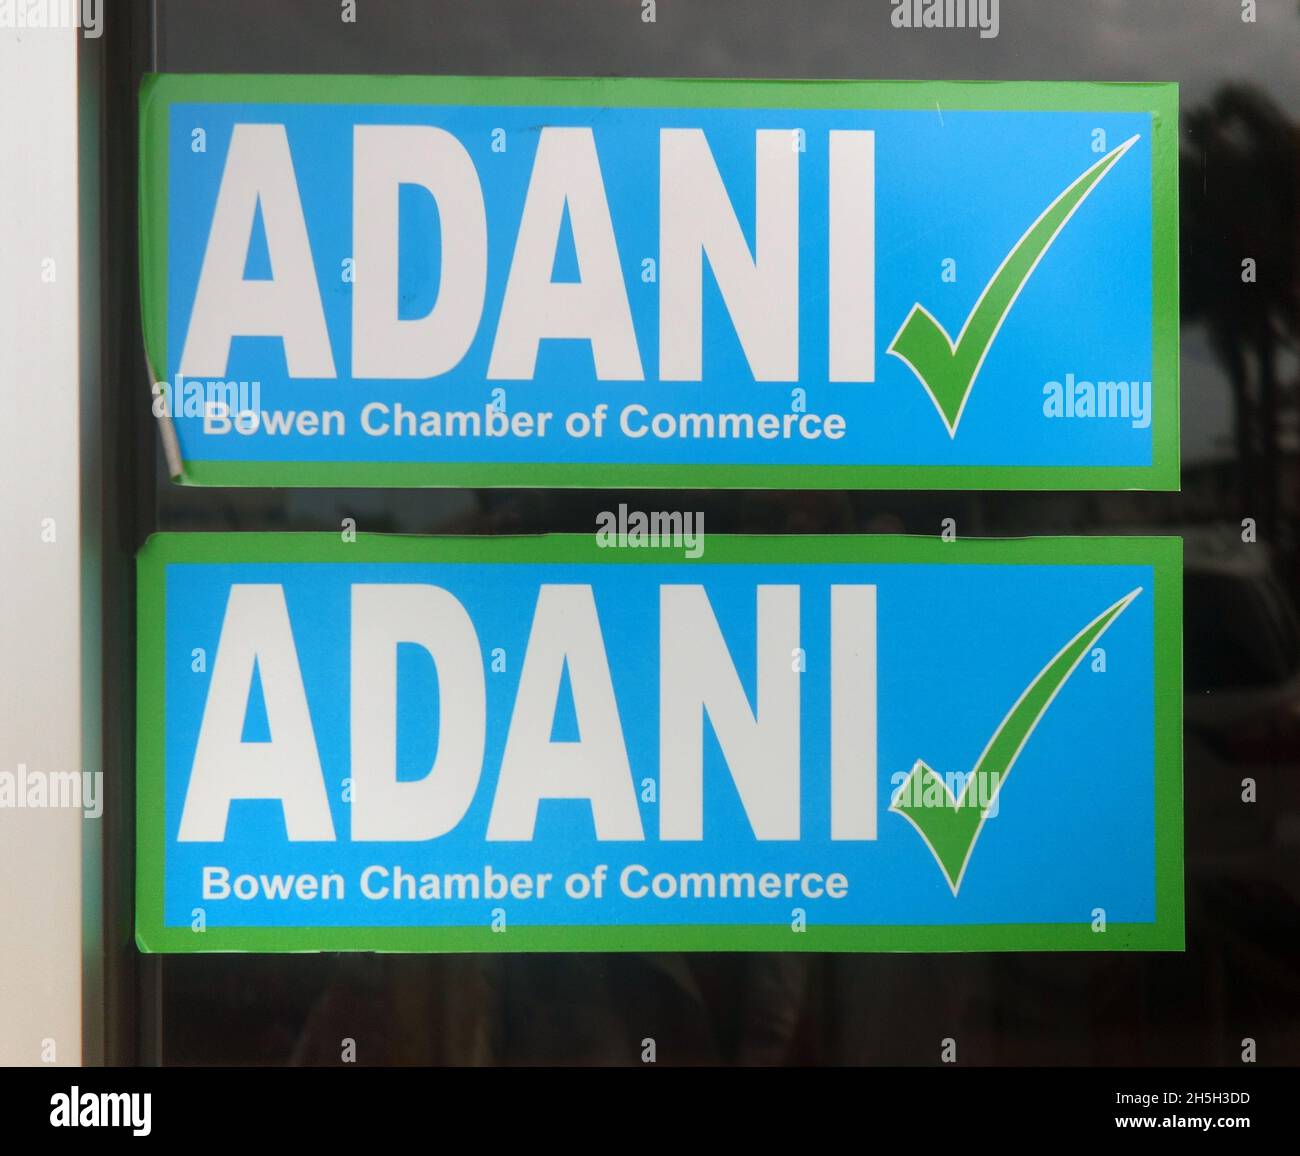 Window stickers distributed to local businesses by Bowen Chamber of Commerce promoting Adani coal mines in the region, Bowen, Queensland, Australia Stock Photo